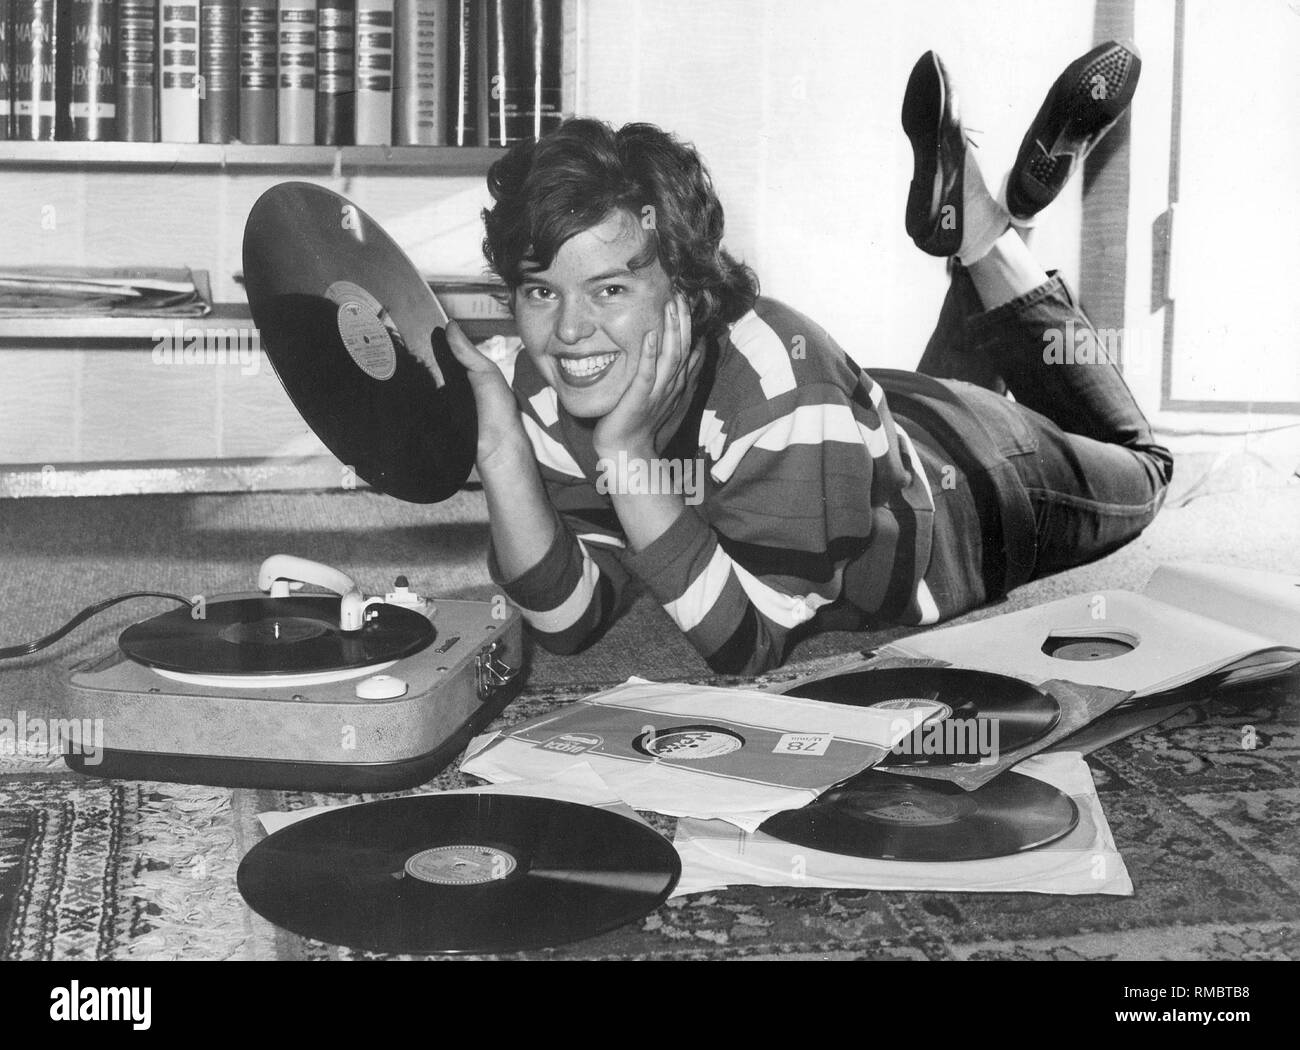 A young woman is listening to vinyl records. Photographer: Pretzl. Stock Photo